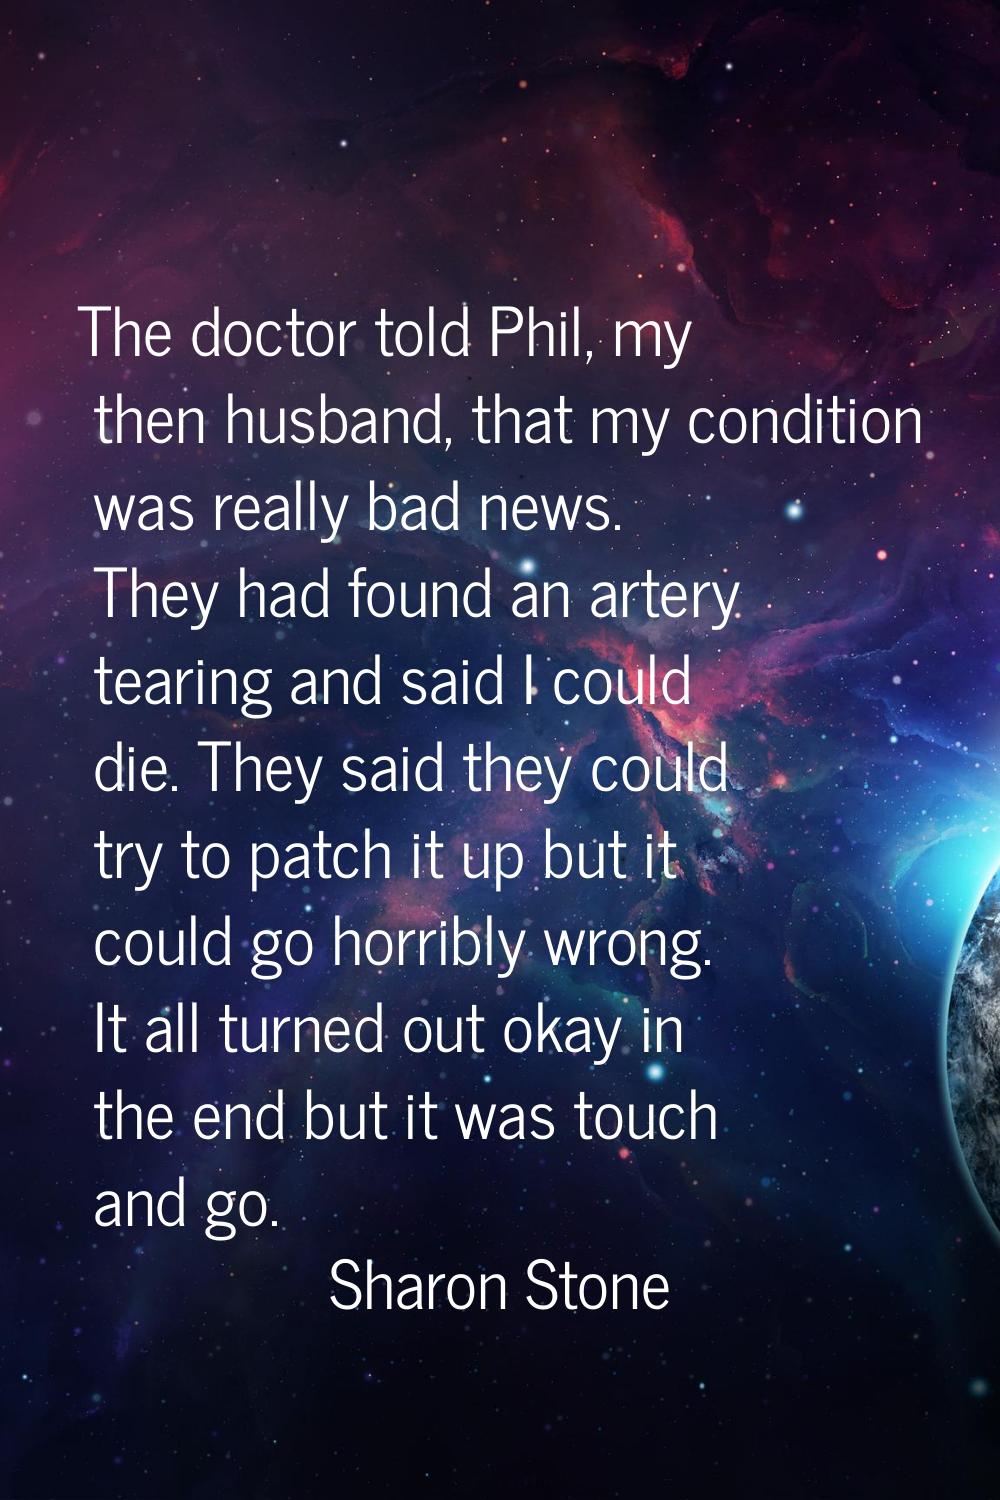 The doctor told Phil, my then husband, that my condition was really bad news. They had found an art